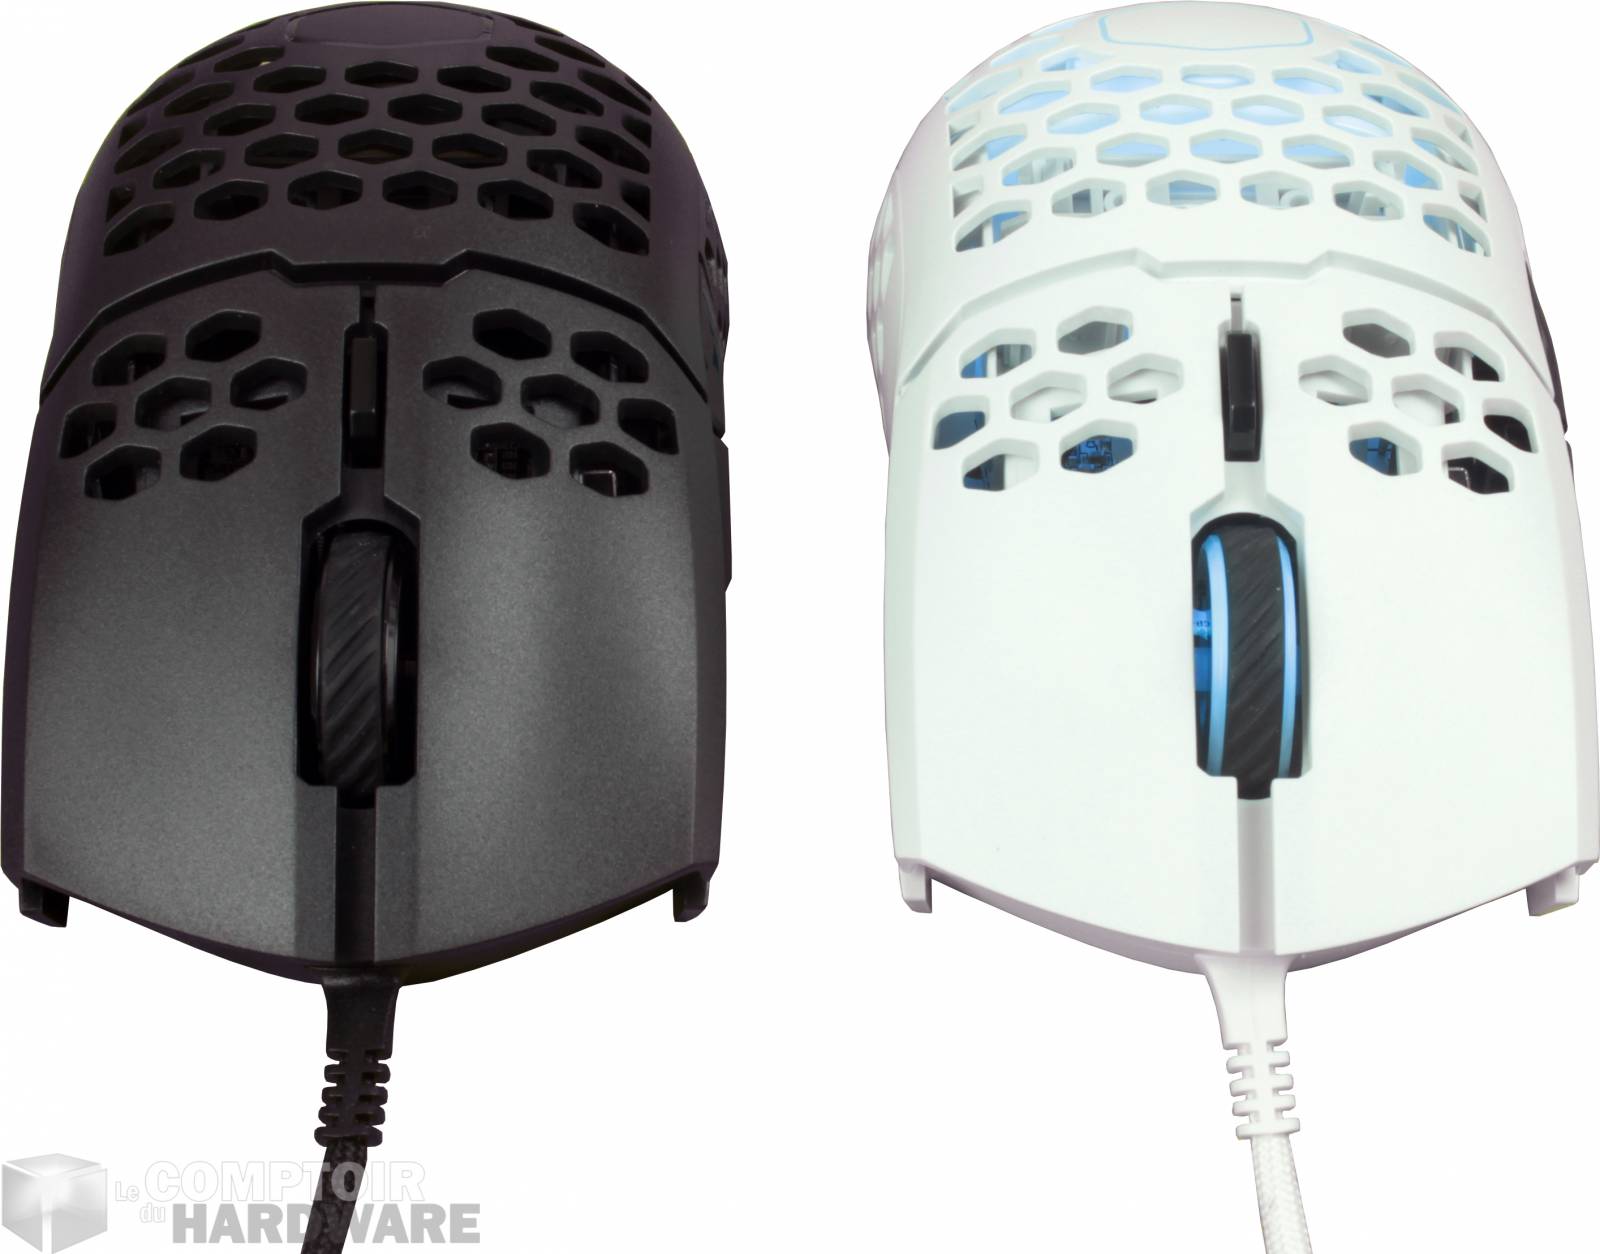 MasterMouse MM711 et MM710